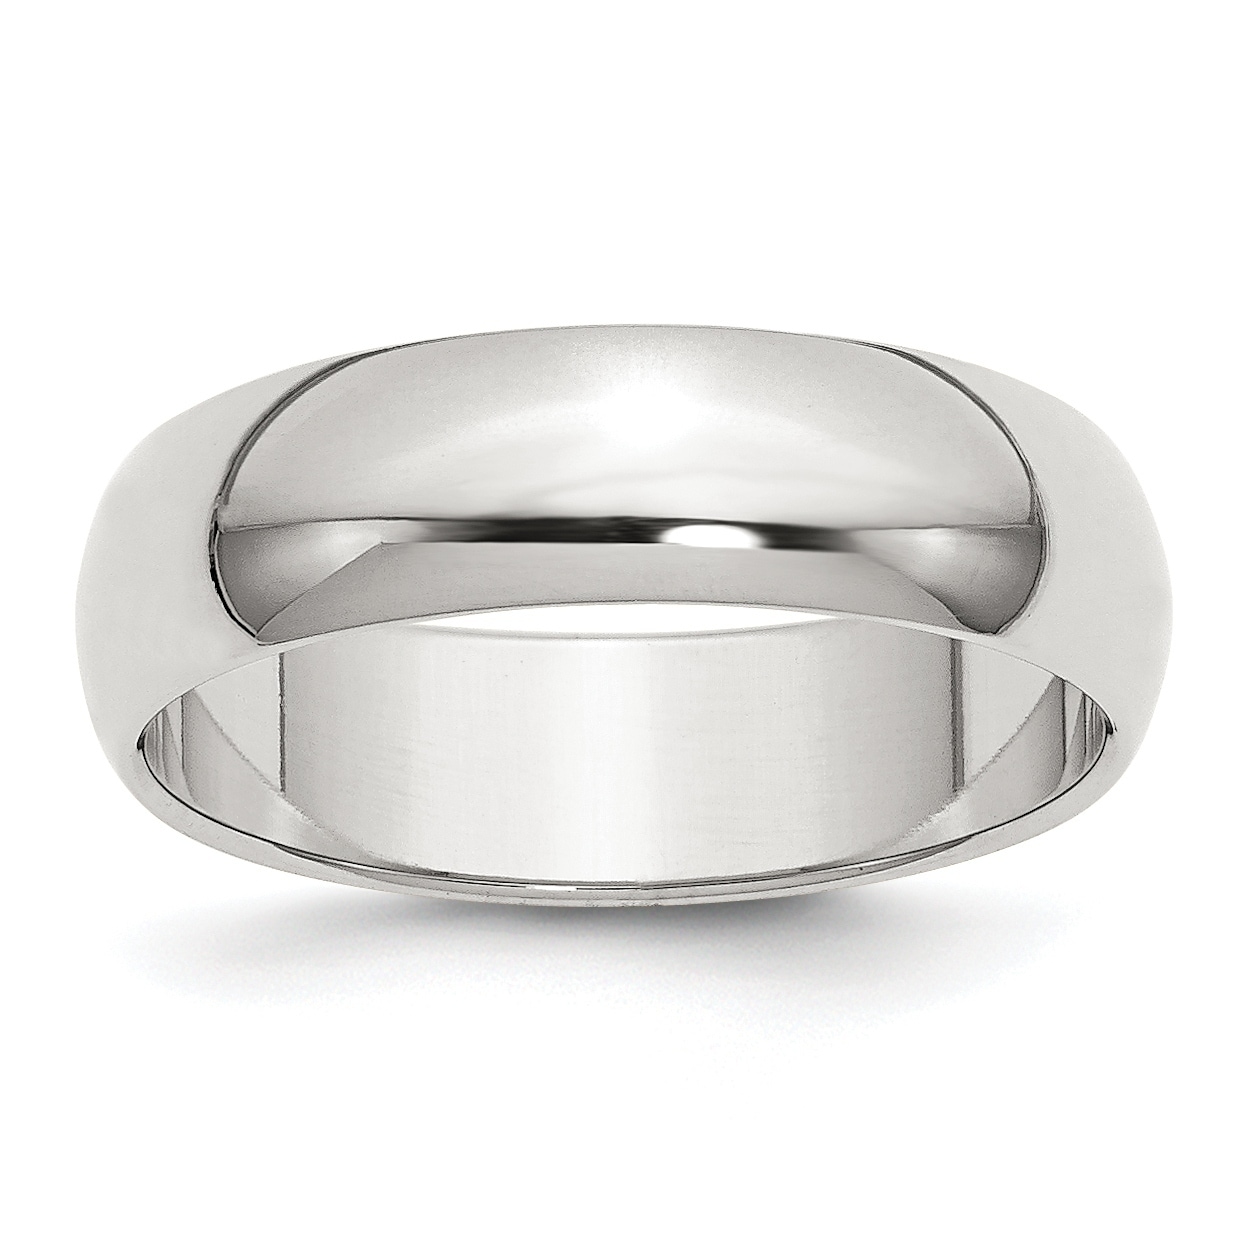 925 Sterling Silver Polished 10mm Half Round Wedding Ring Band Size 4-13.5